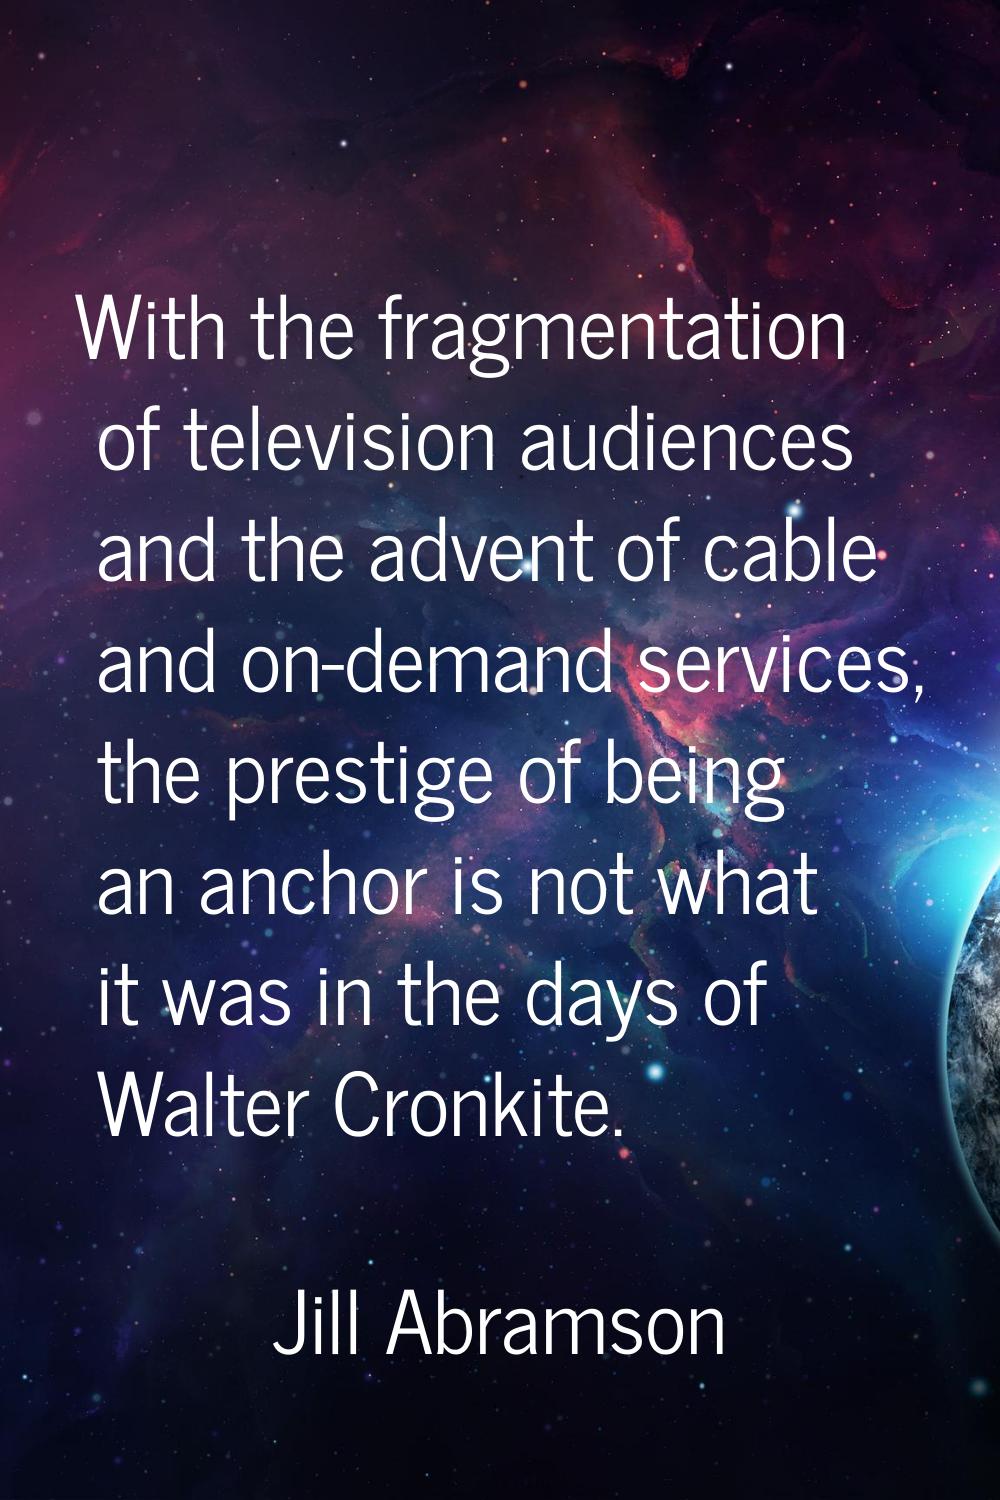 With the fragmentation of television audiences and the advent of cable and on-demand services, the 